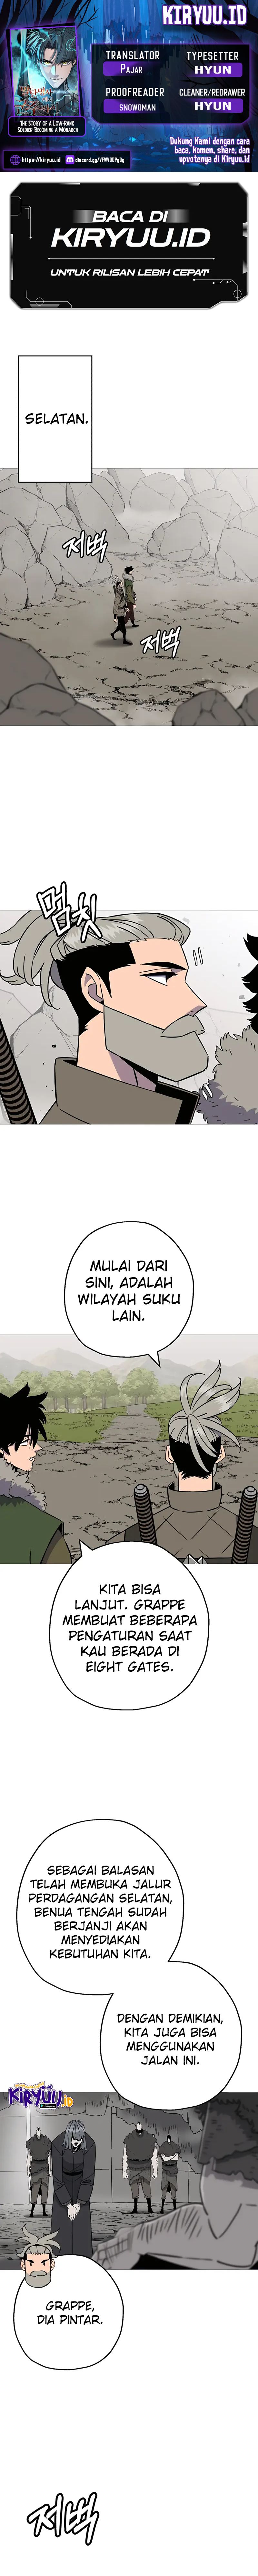 Dilarang COPAS - situs resmi www.mangacanblog.com - Komik the story of a low rank soldier becoming a monarch 126 - chapter 126 127 Indonesia the story of a low rank soldier becoming a monarch 126 - chapter 126 Terbaru 0|Baca Manga Komik Indonesia|Mangacan